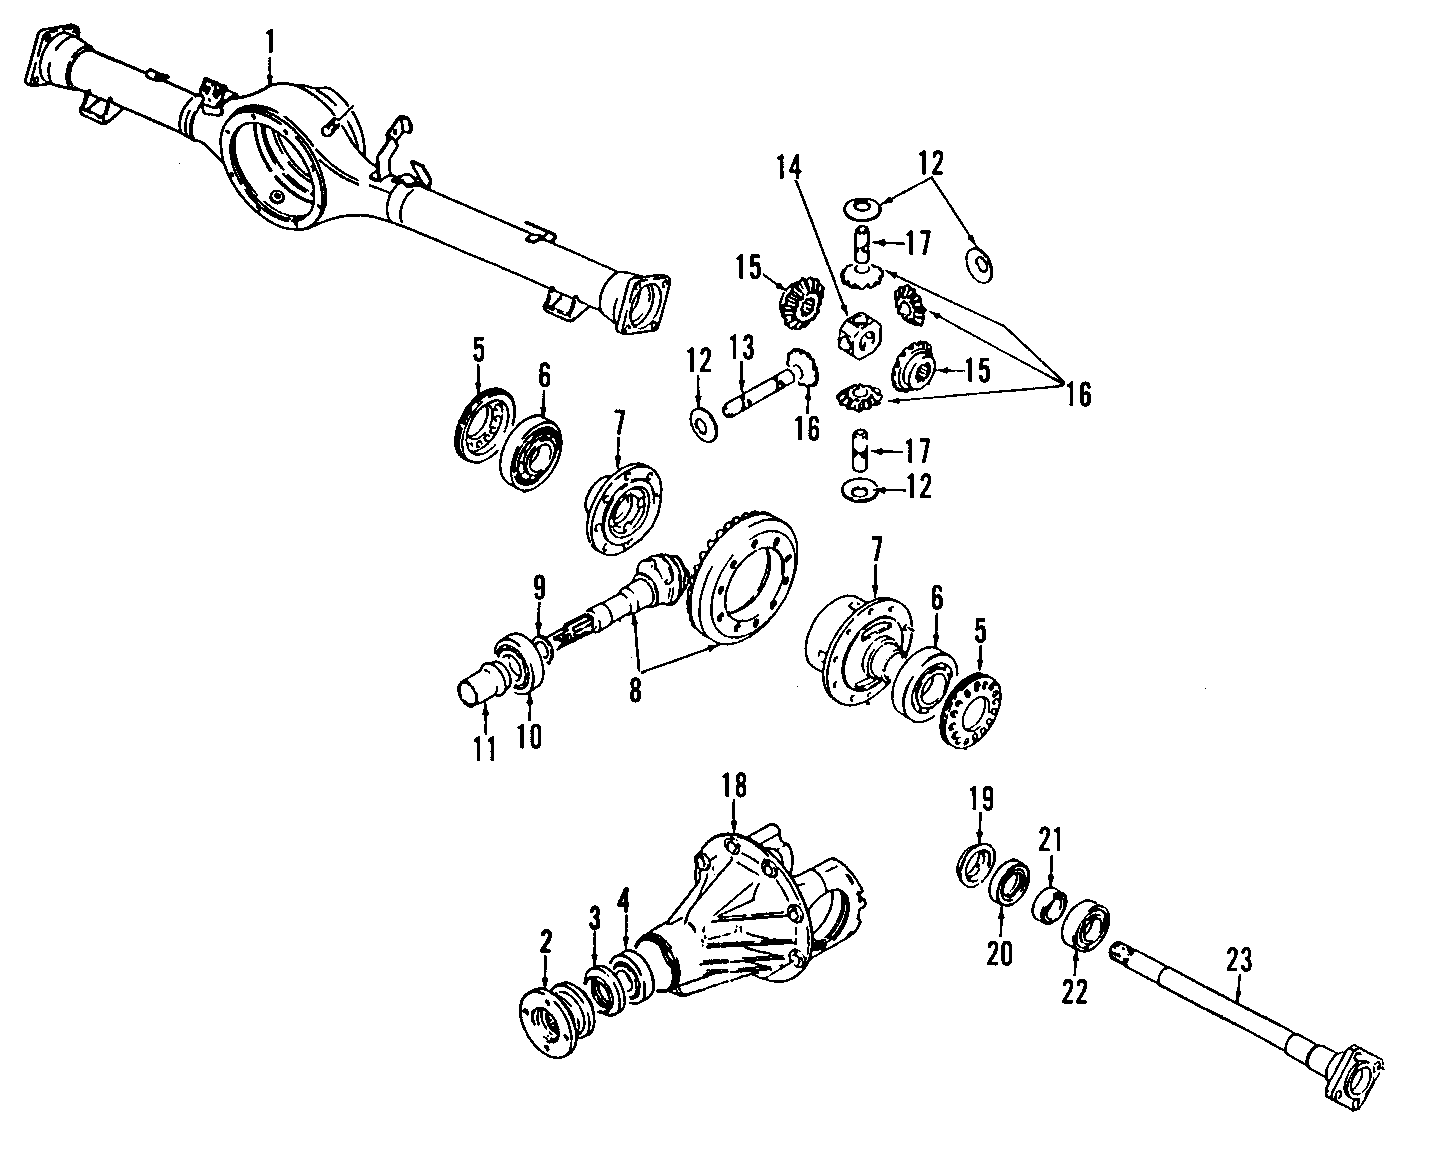 13REAR AXLE. DIFFERENTIAL. PROPELLER SHAFT.https://images.simplepart.com/images/parts/motor/fullsize/T011110.png